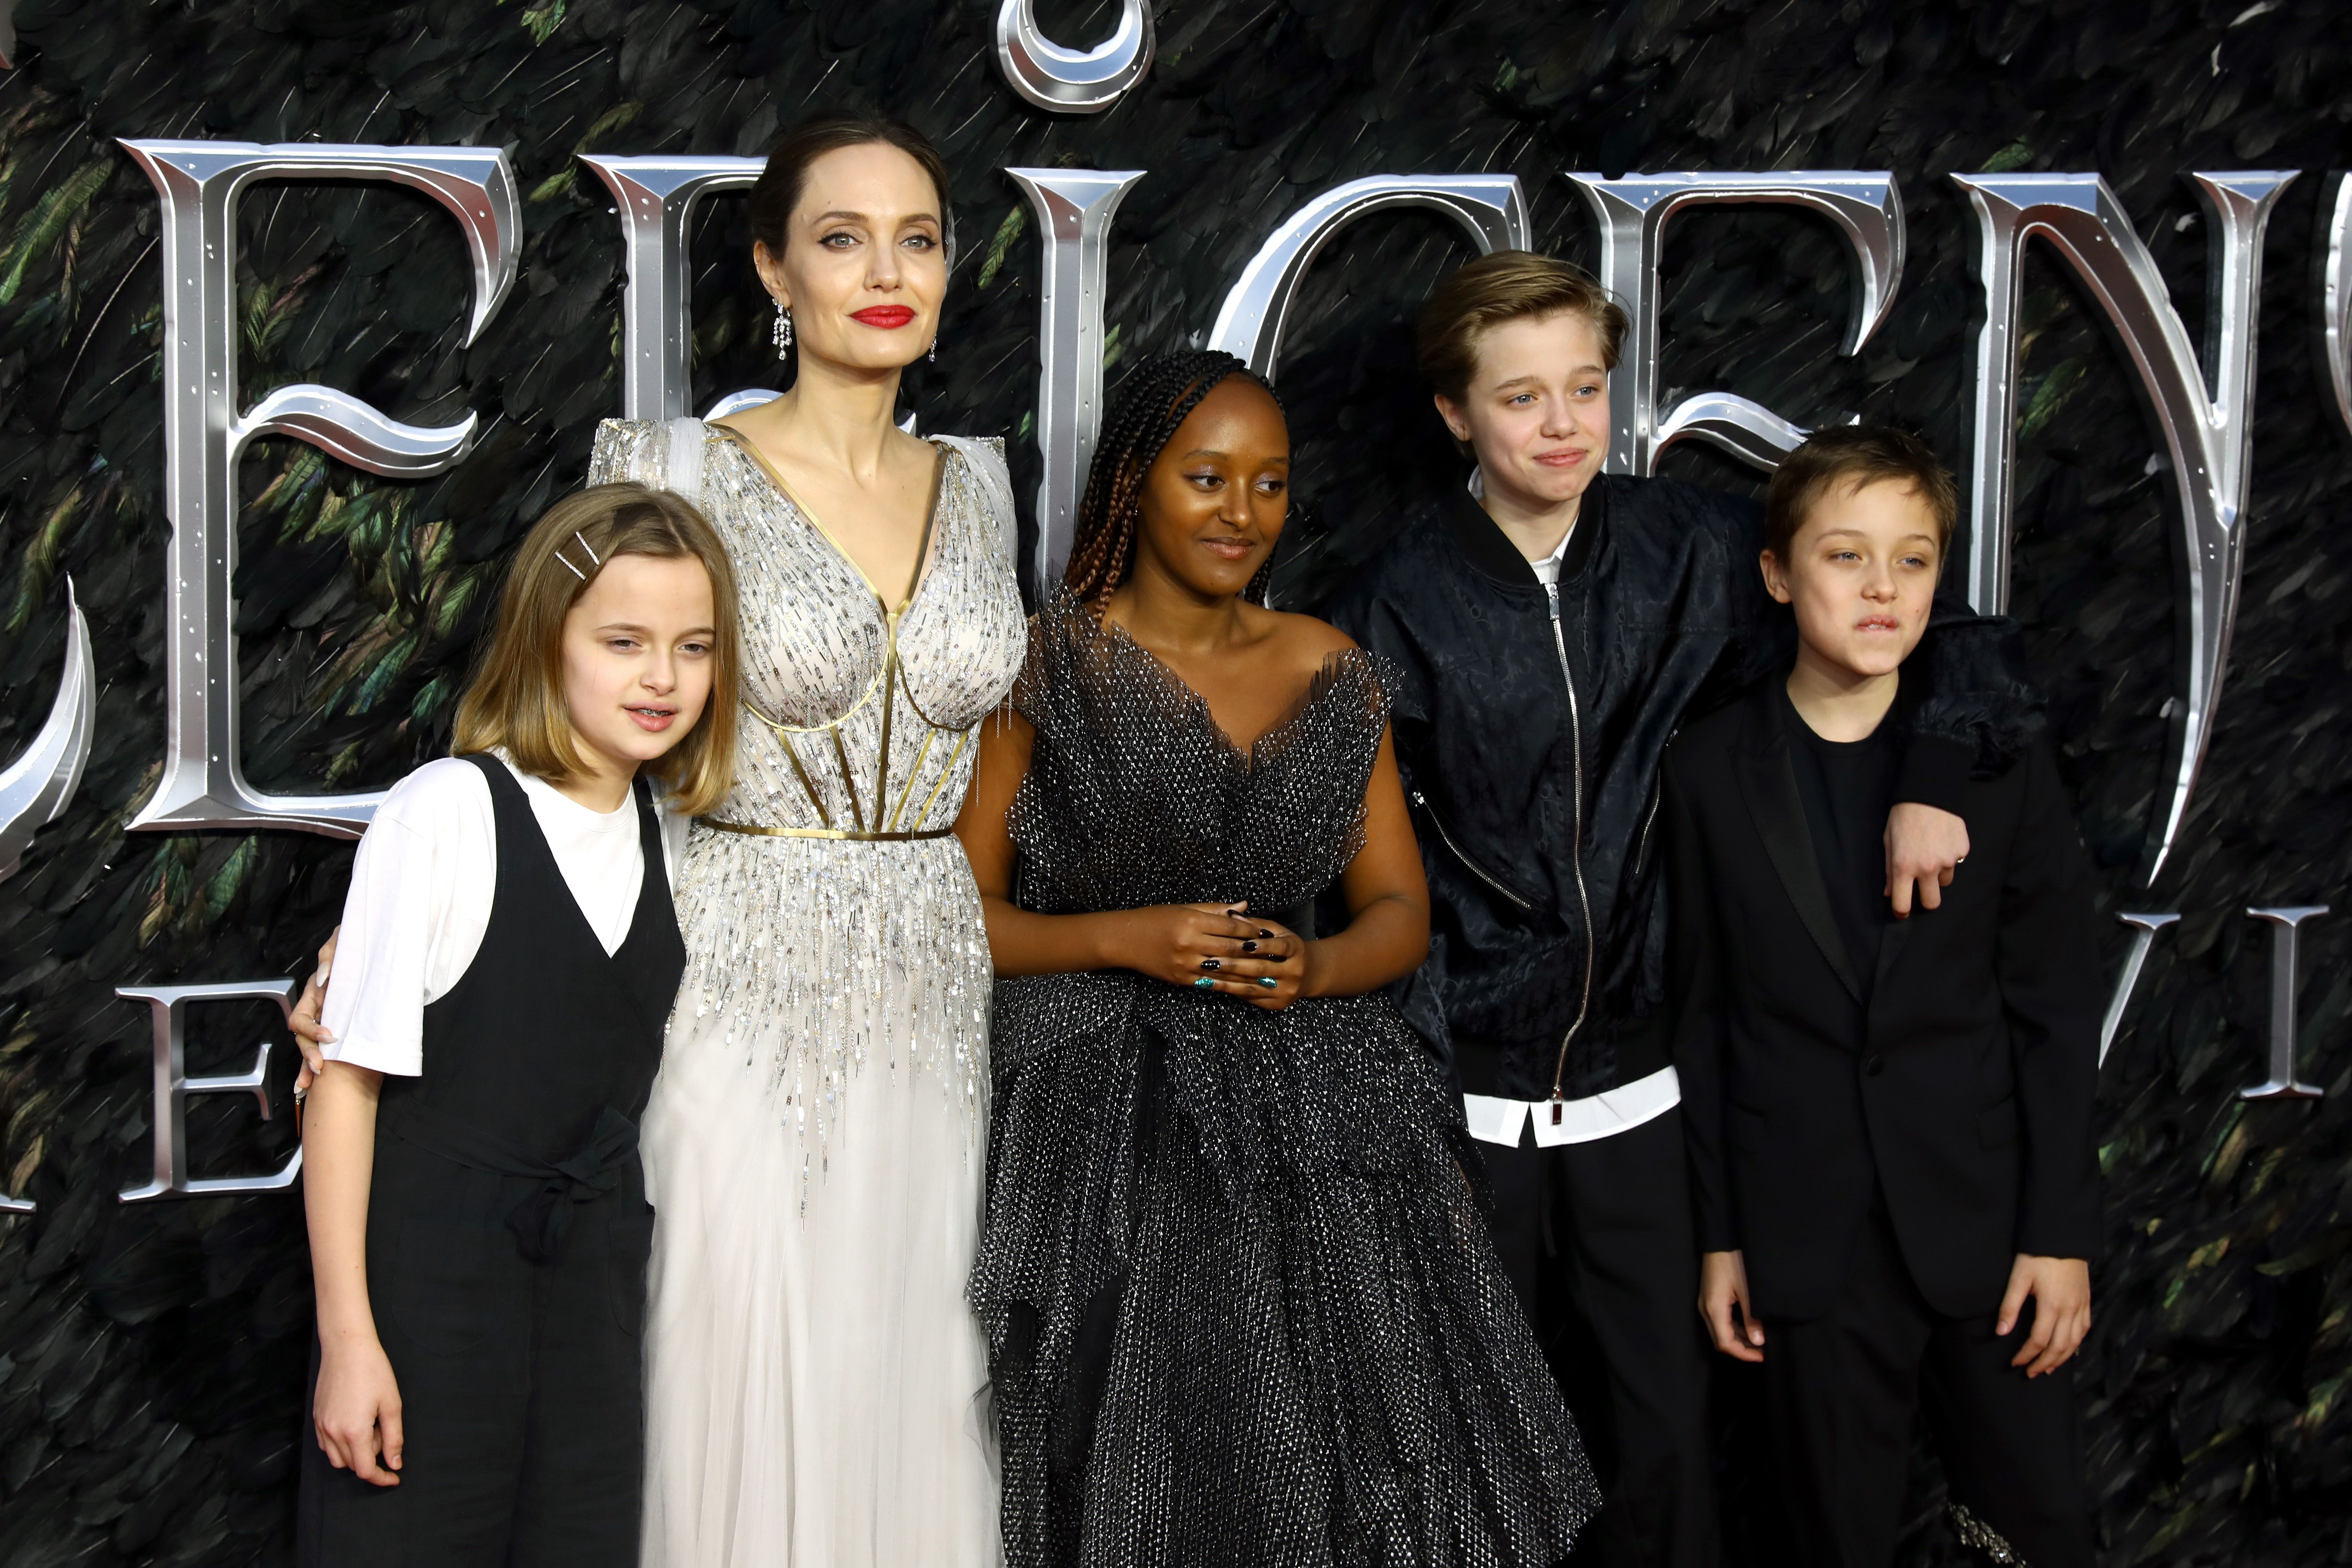 Vivienne Marcheline Jolie-Pitt, Angelina Jolie, Zahara Marley Jolie-Pitt, Shiloh Nouvel Jolie-Pitt and Knox Jolie-Pitt during the European premiere of "Maleficent: Mistress of Evil" at Odeon IMAX Waterloo on October 09, 2019, in London, England. | Source: Getty Images